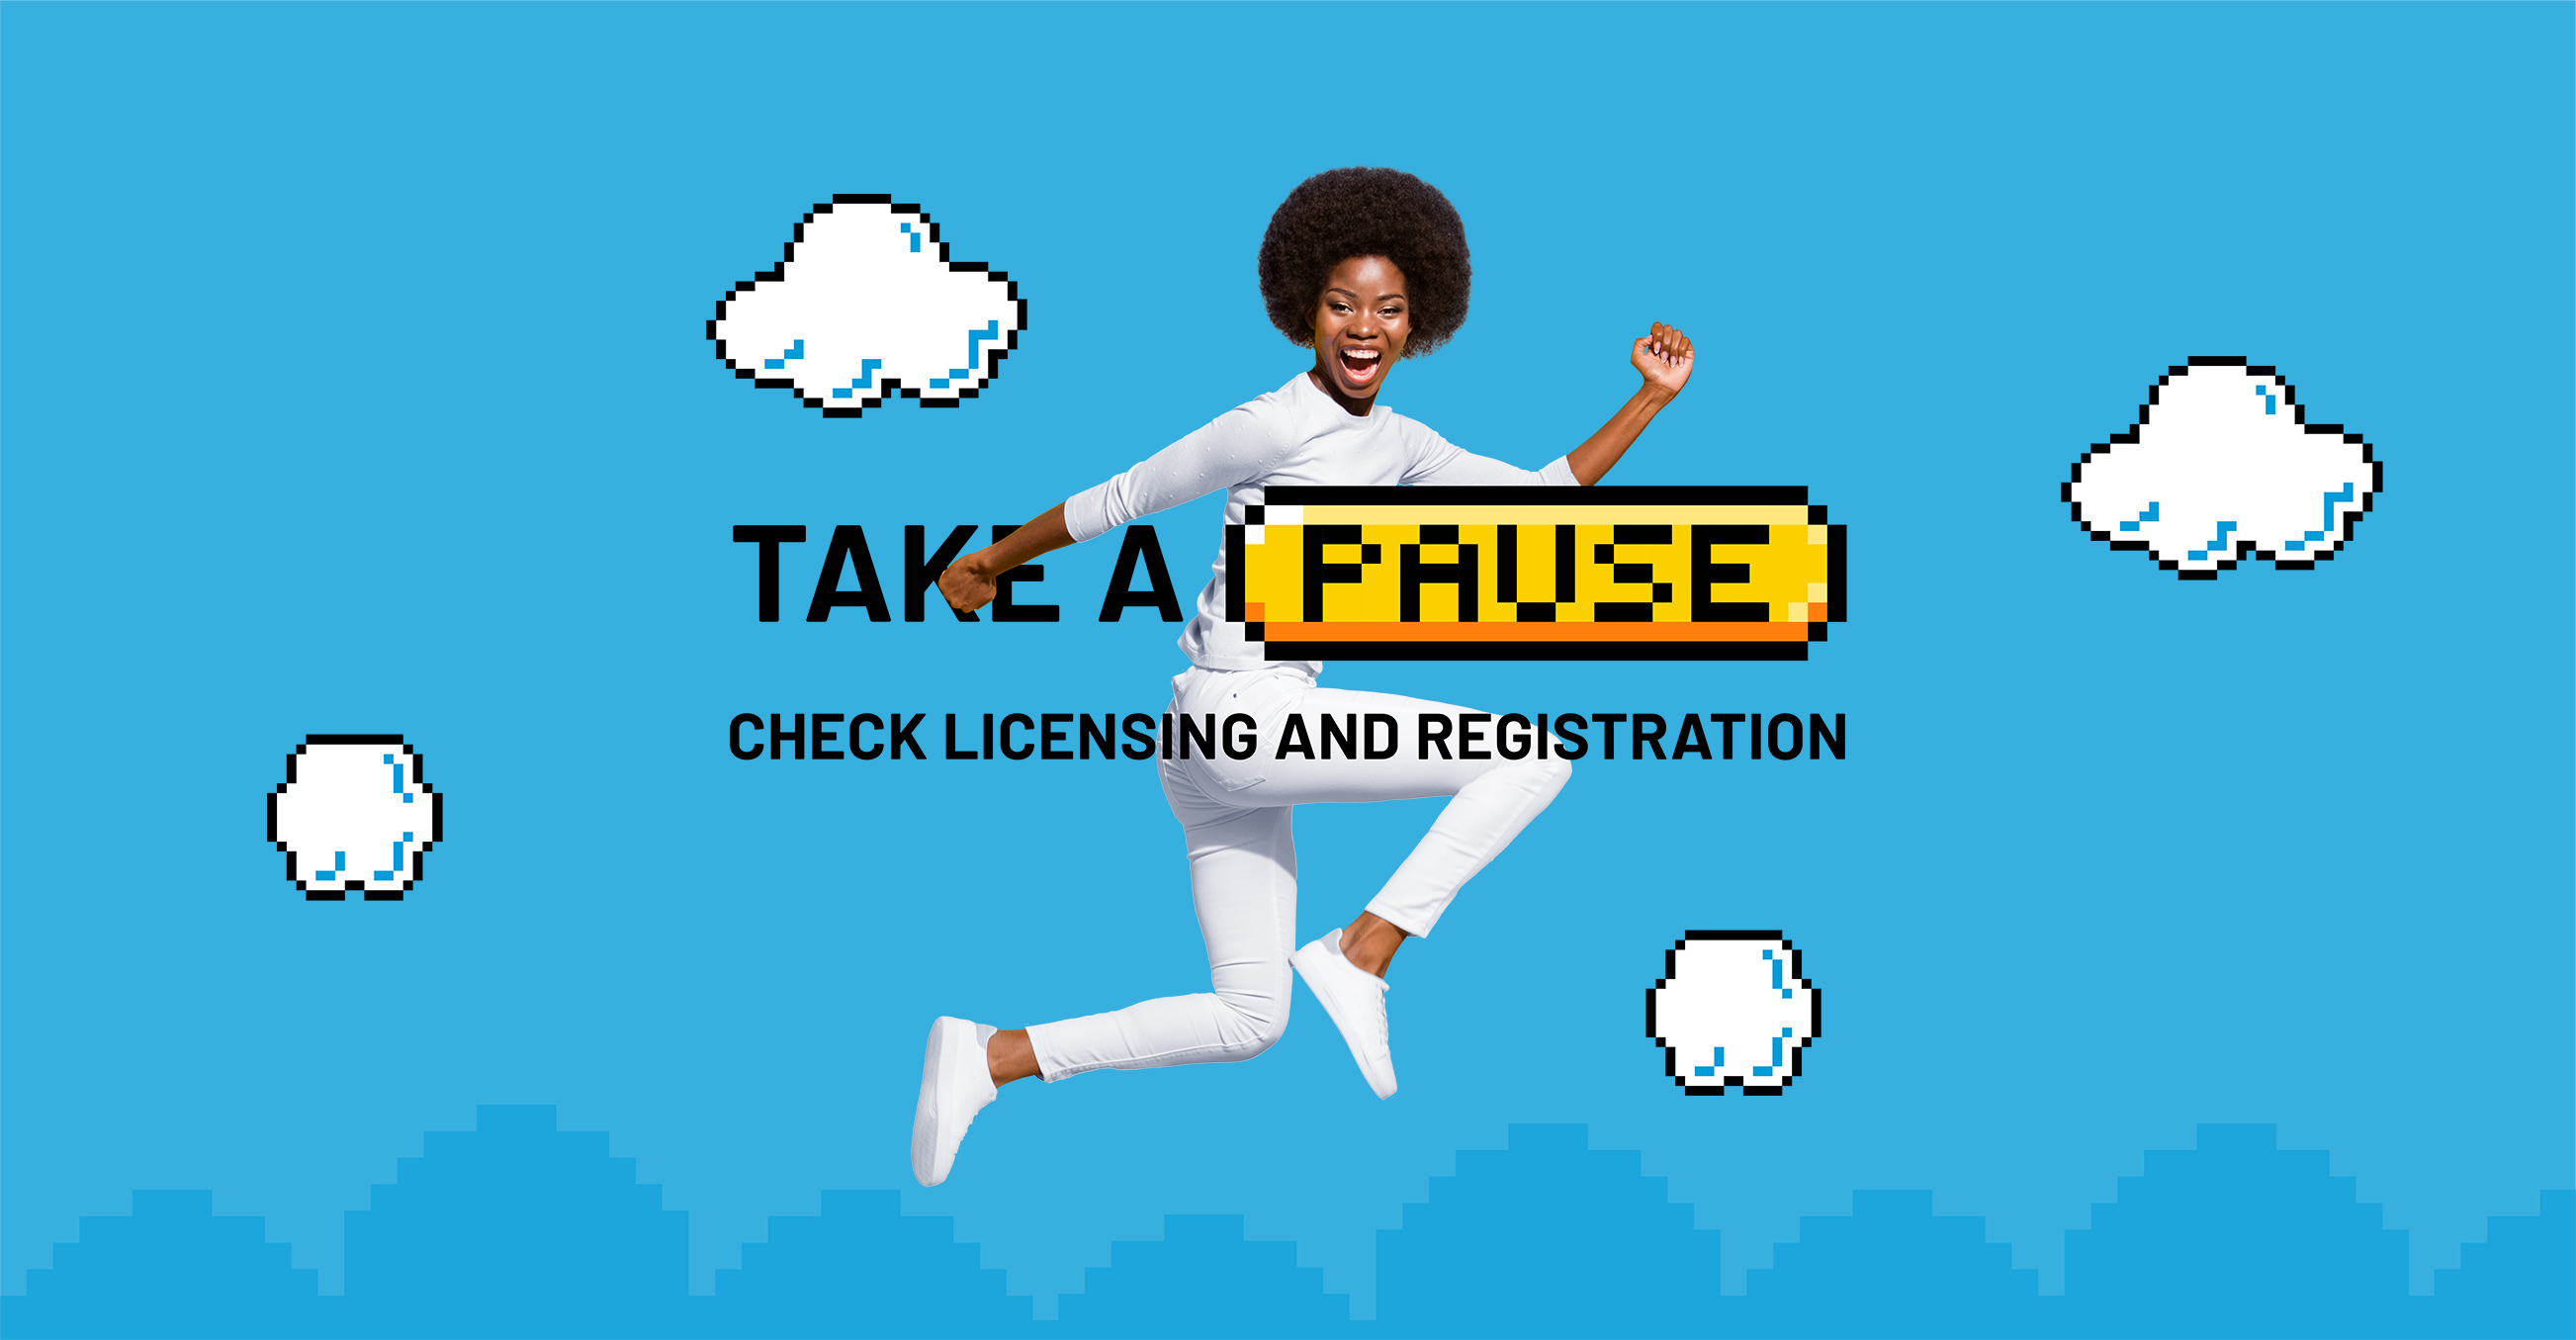 Take a pause. Check licensing and registration.